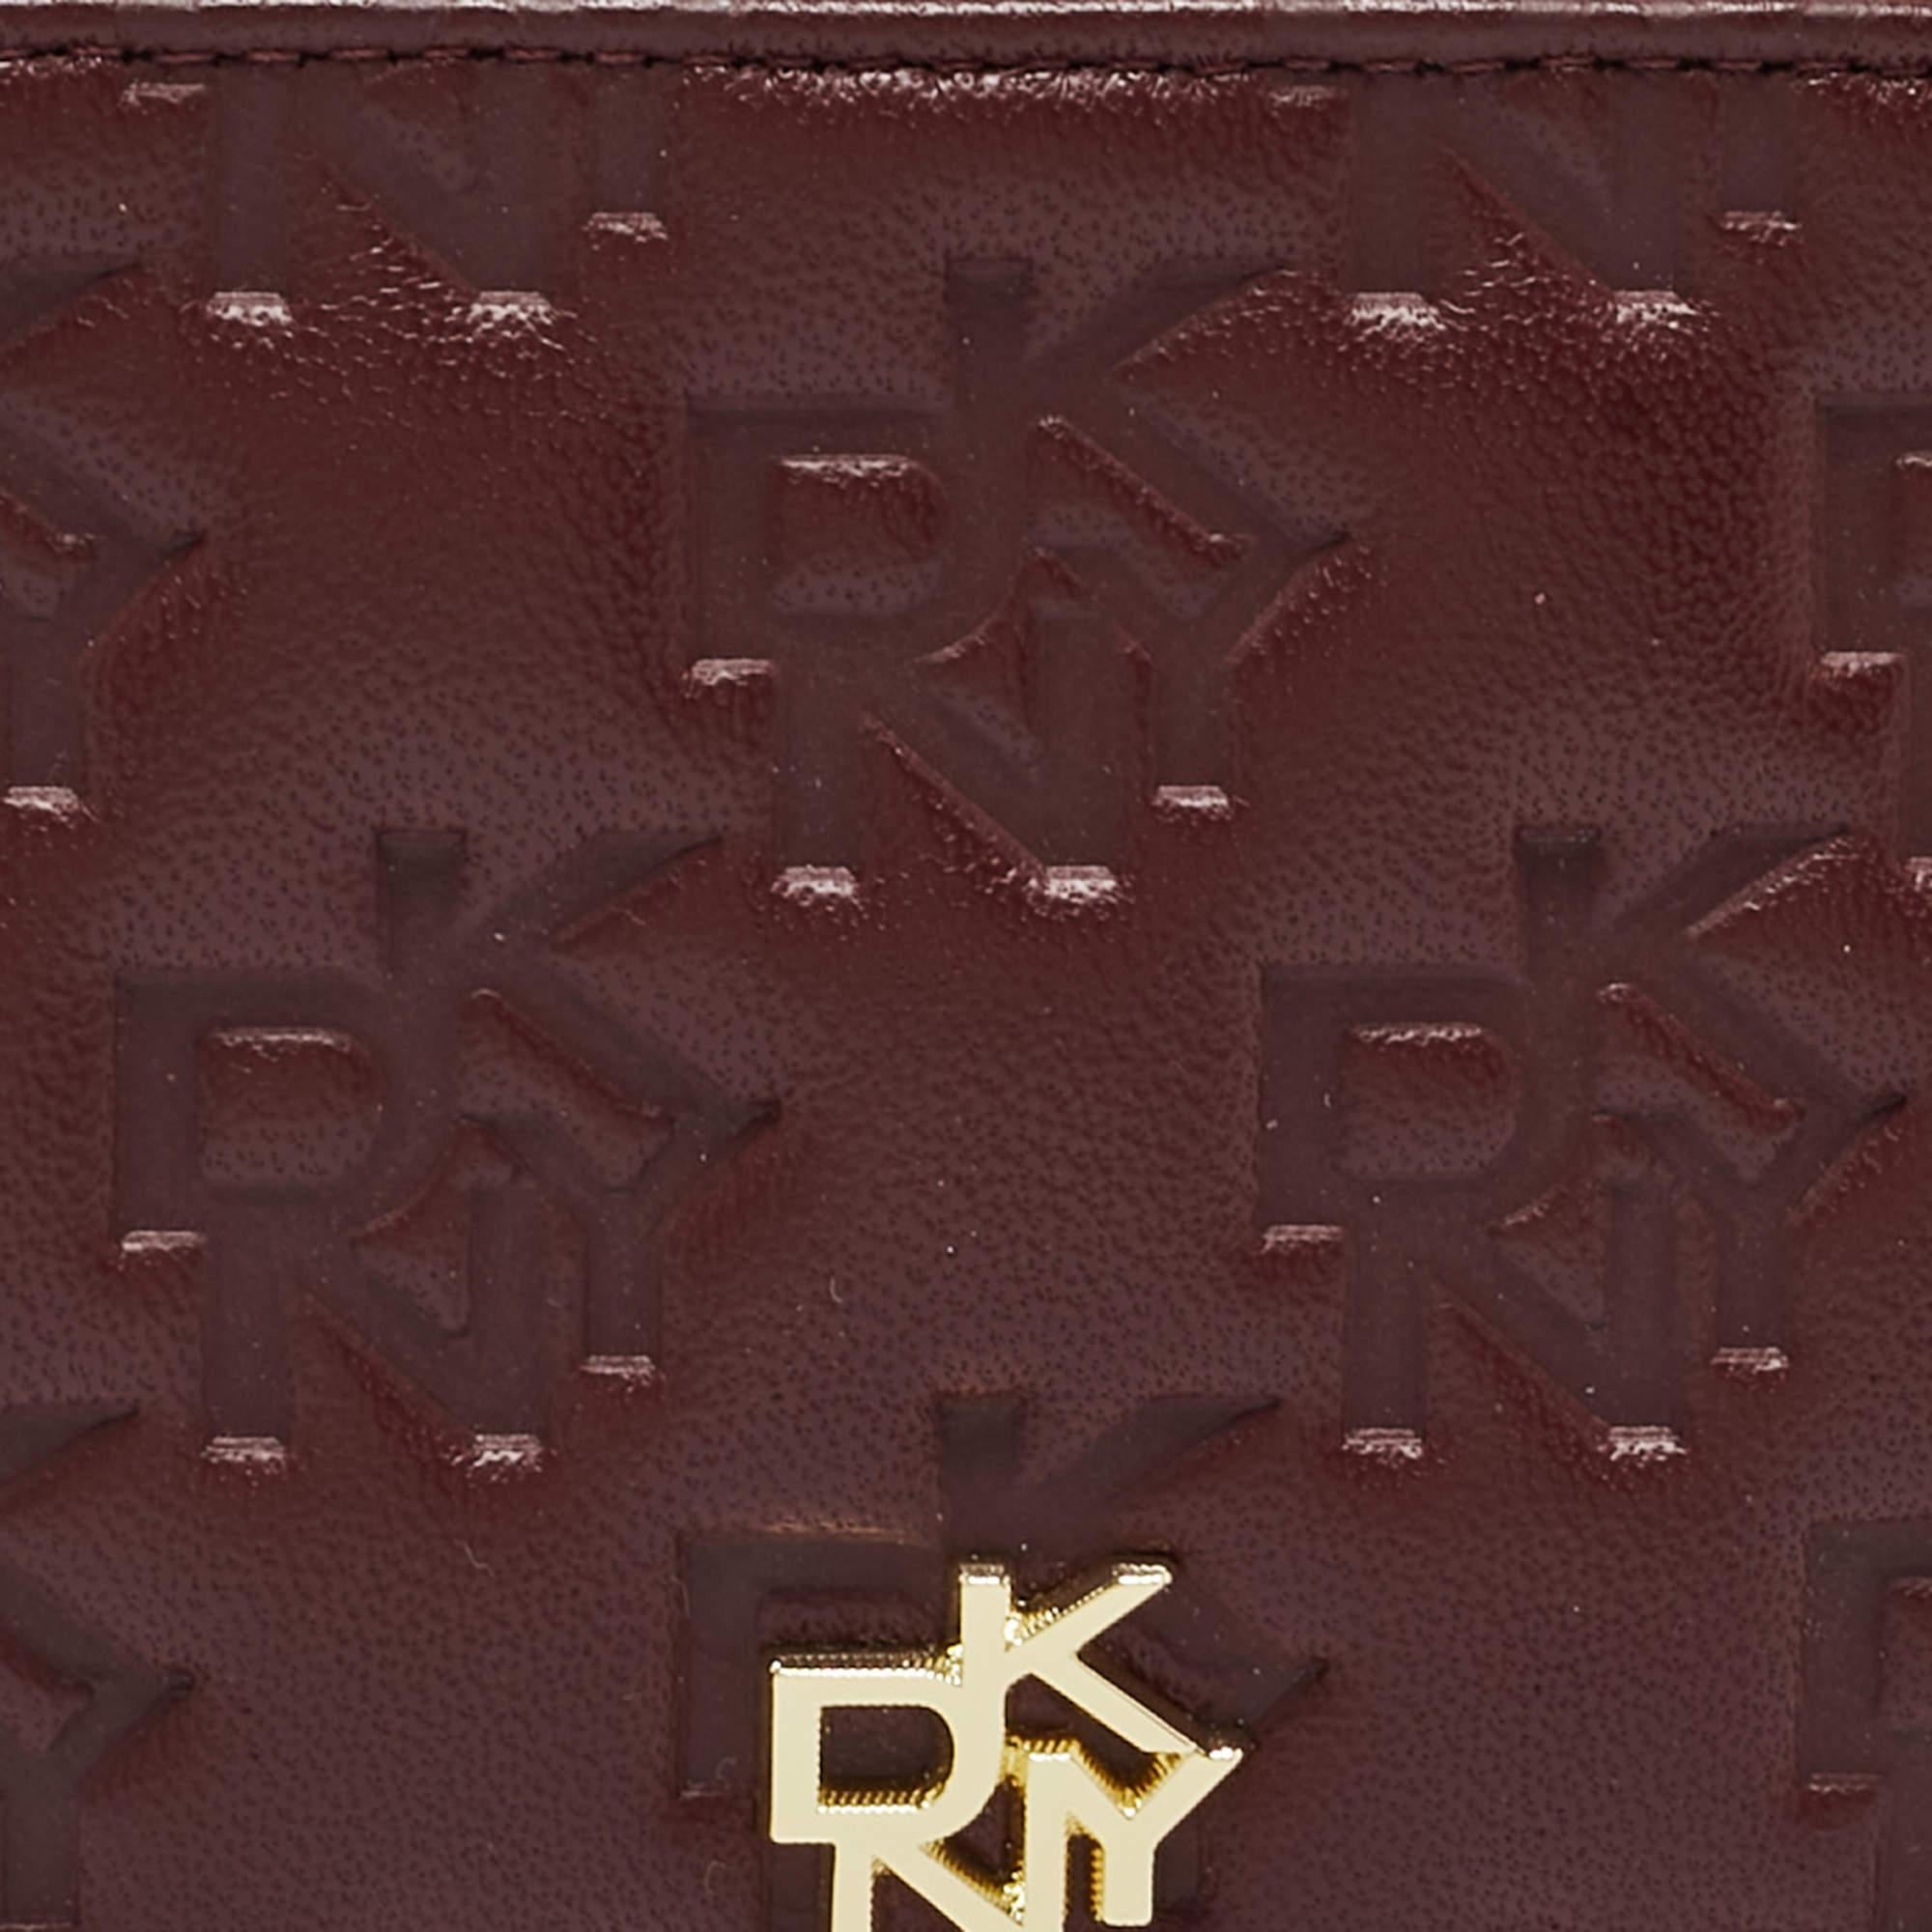 DKNY Burgundy Signature Embossed Leather Catherine Key Card Case In Excellent Condition For Sale In Dubai, Al Qouz 2